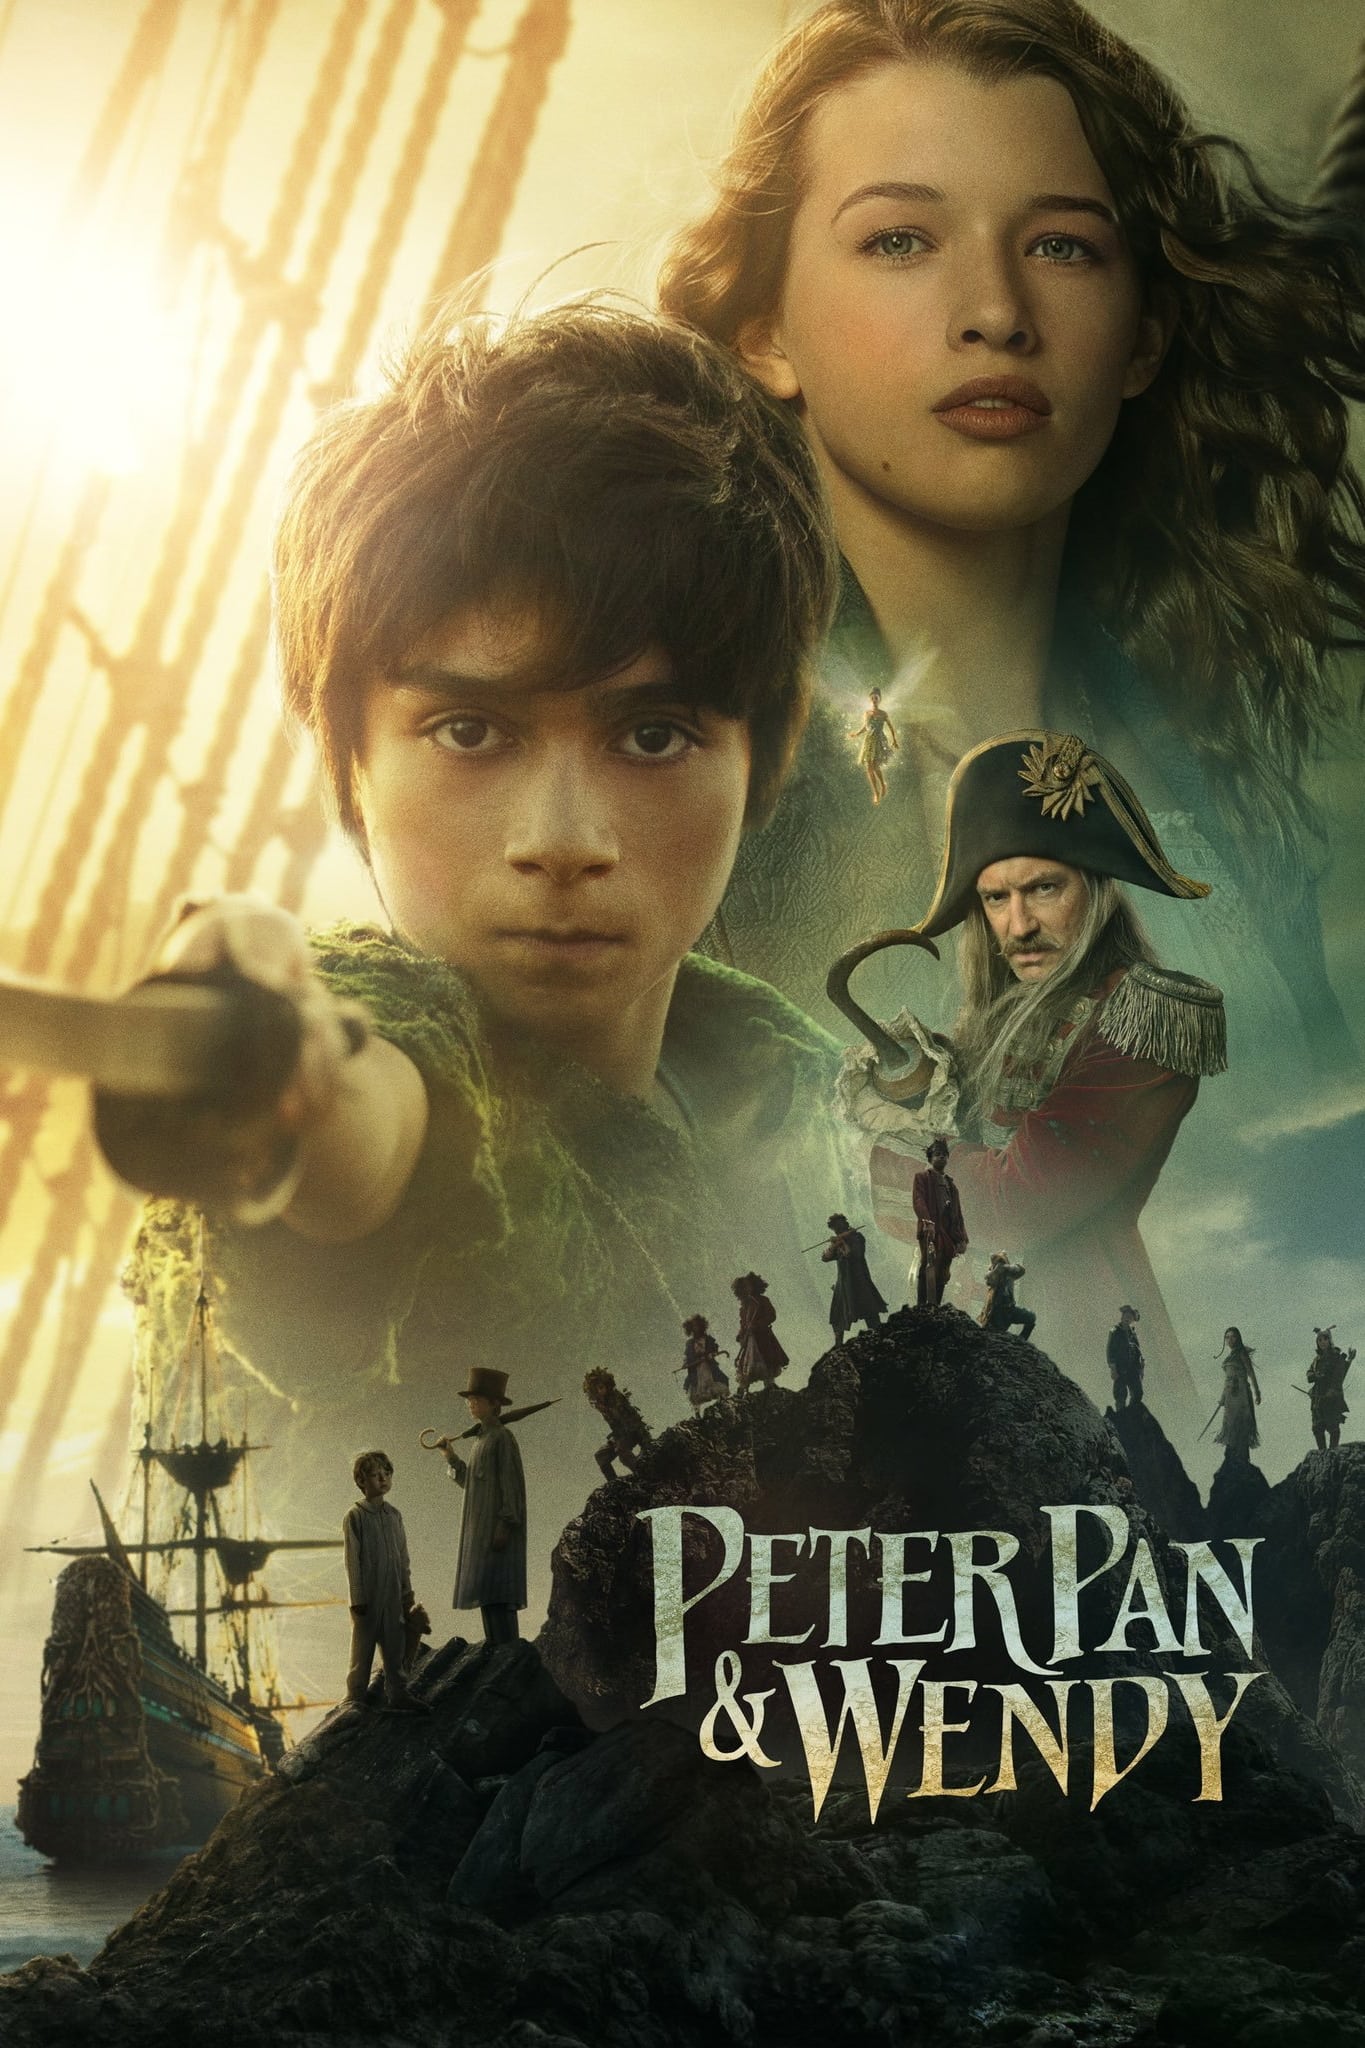 Peter pan and wendy 123movies